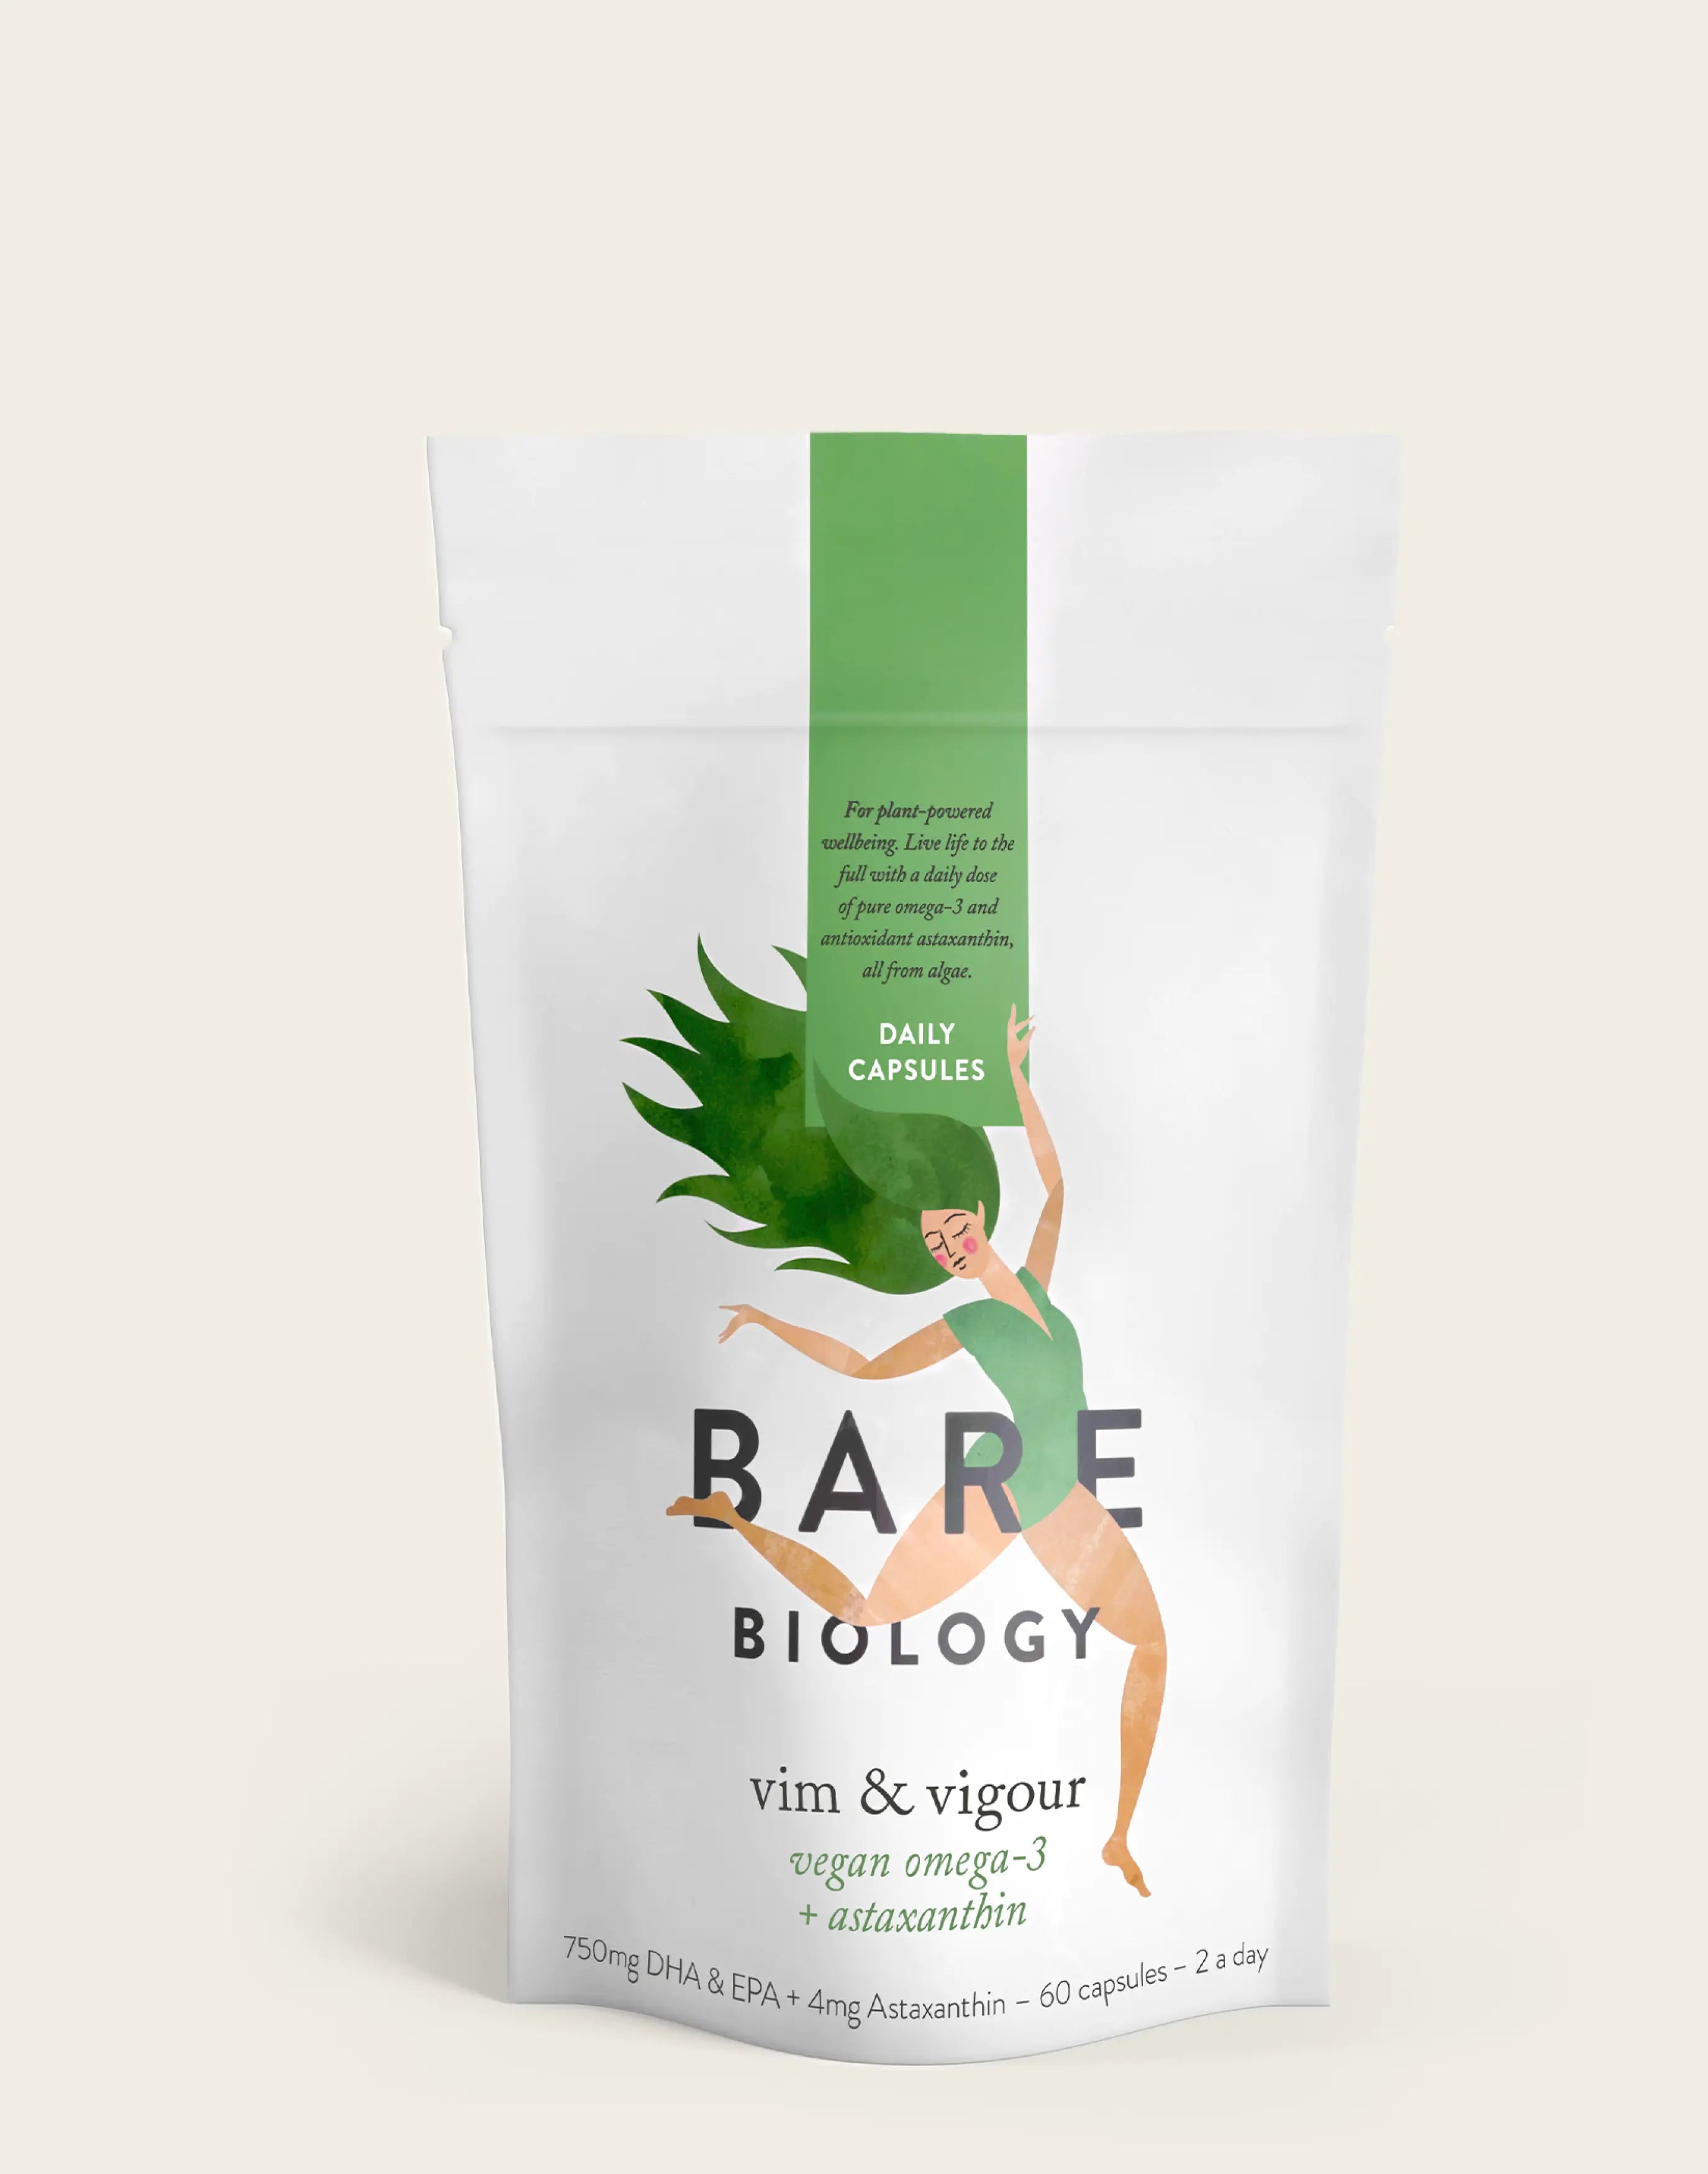 View Vegan Omega3 Capsules Vim Vigour Made From Sustainable Algae 100 Plant Based Supplement Letterbox Friendly Paper Pouch Bare Biology information